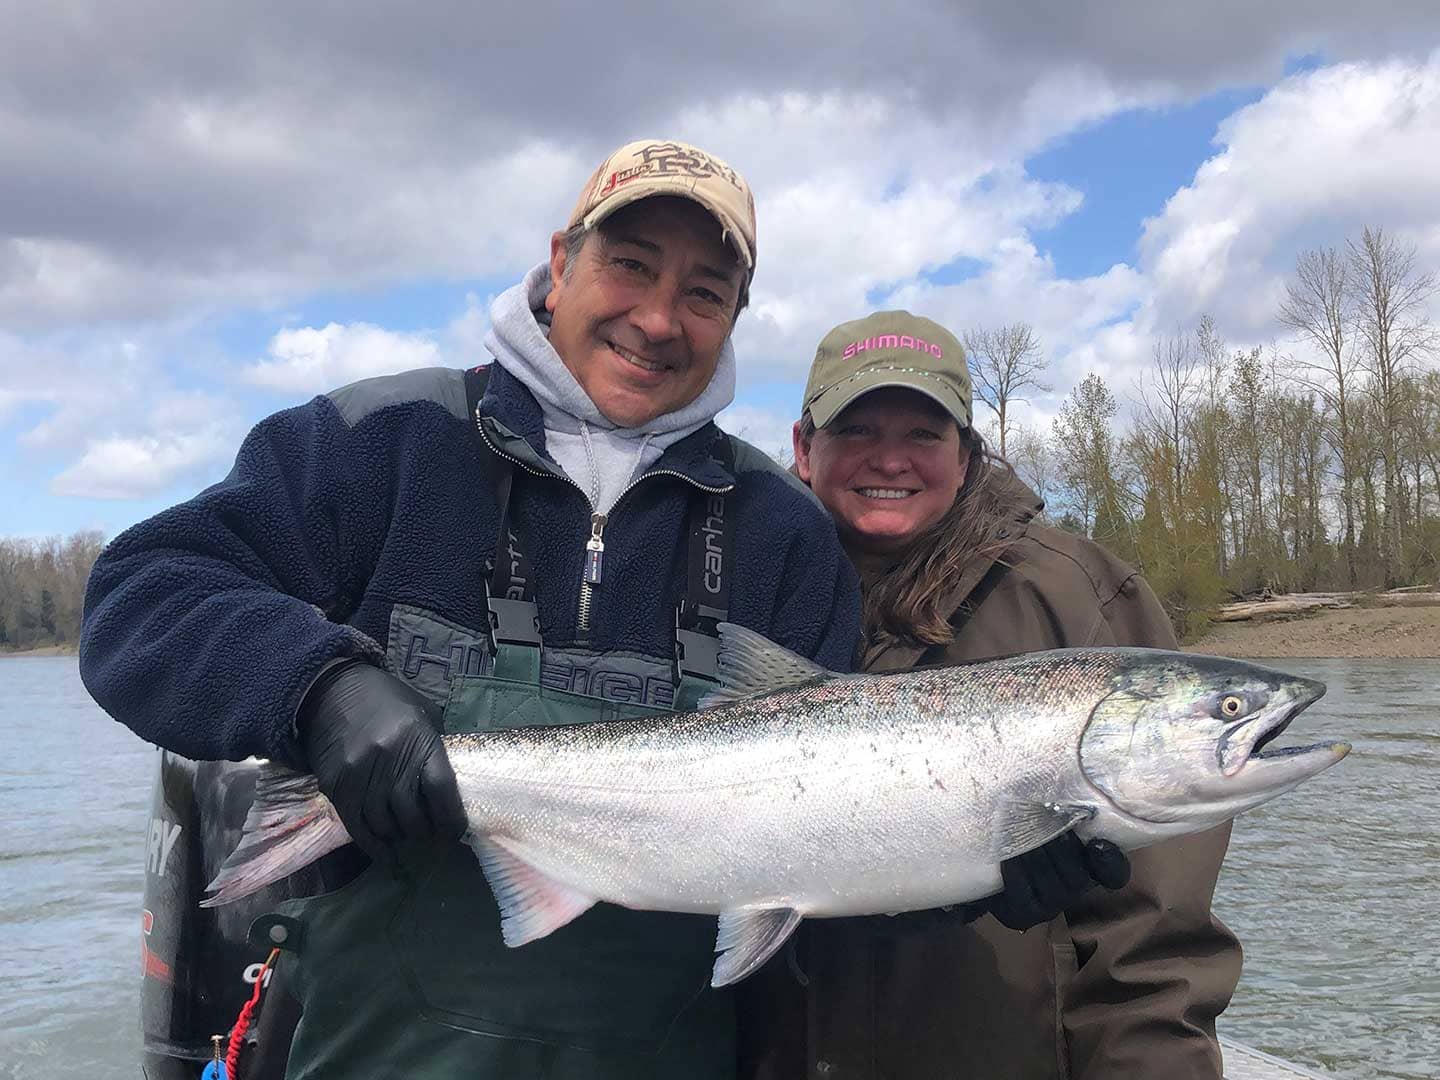 A man and a woman holding up a steelhead on a fishing boat